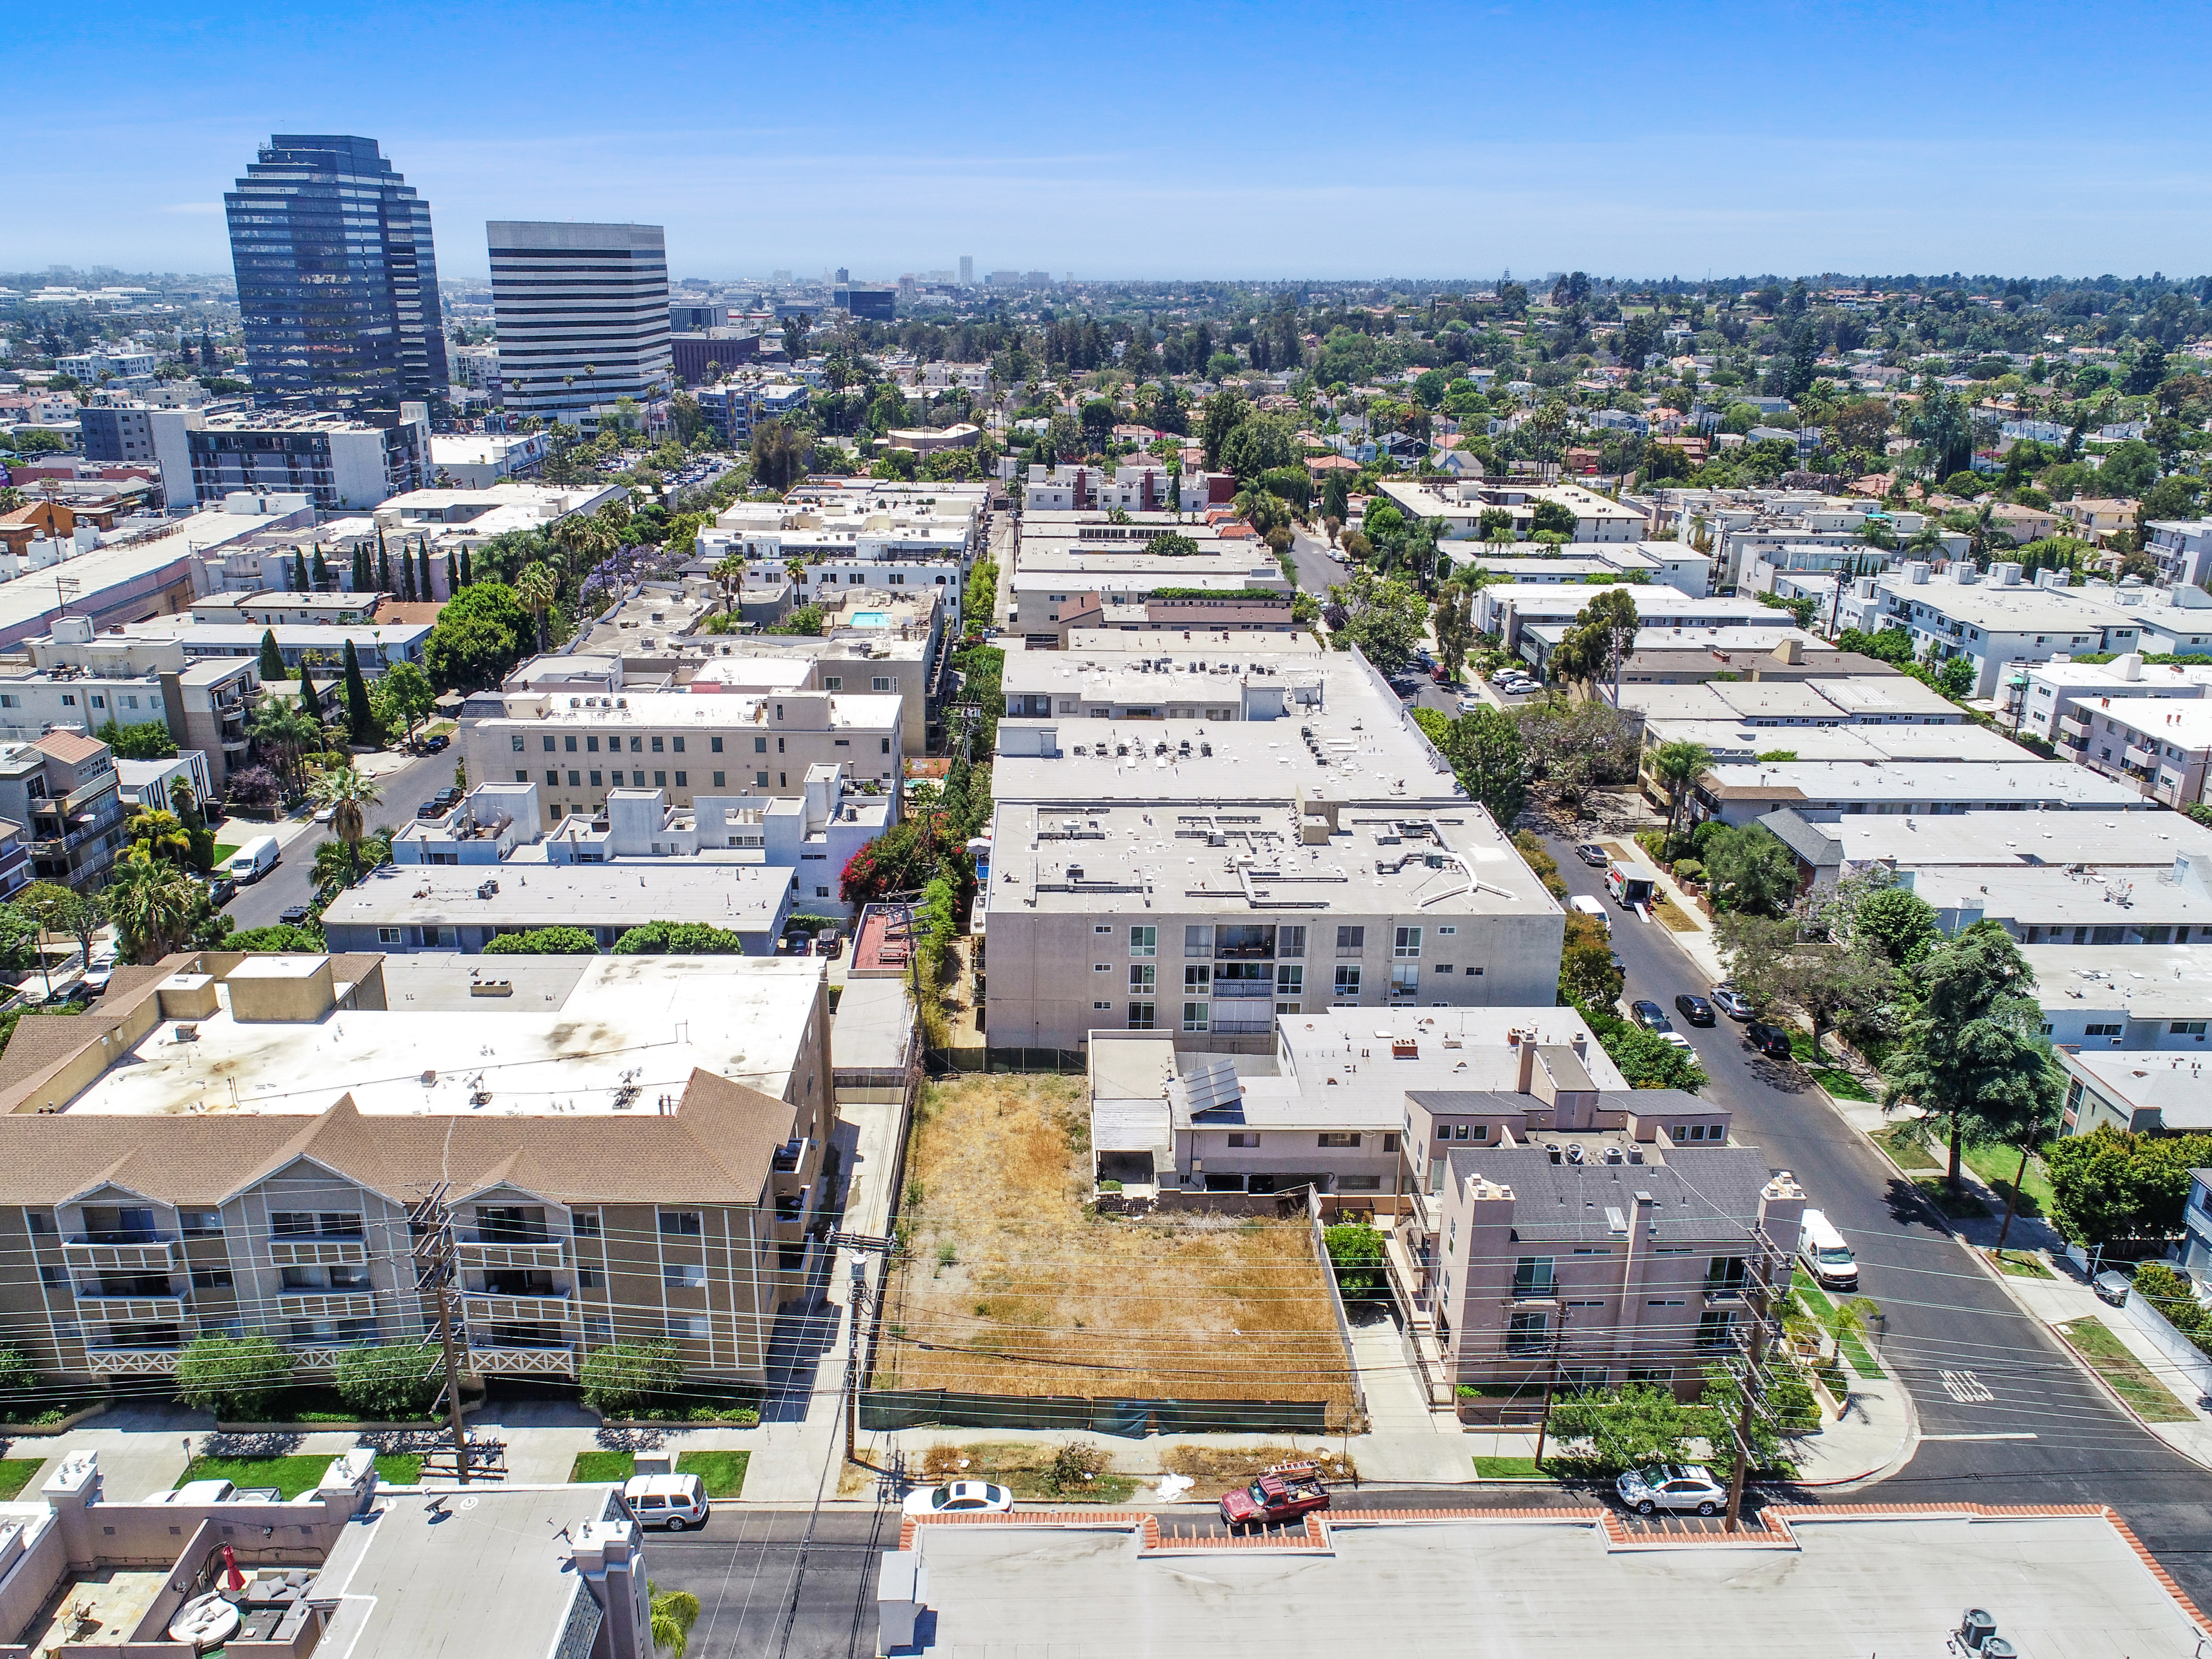 New Listing For Sale – 6,900 SF of Multifamily Land in Brentwood – Development Opportunity